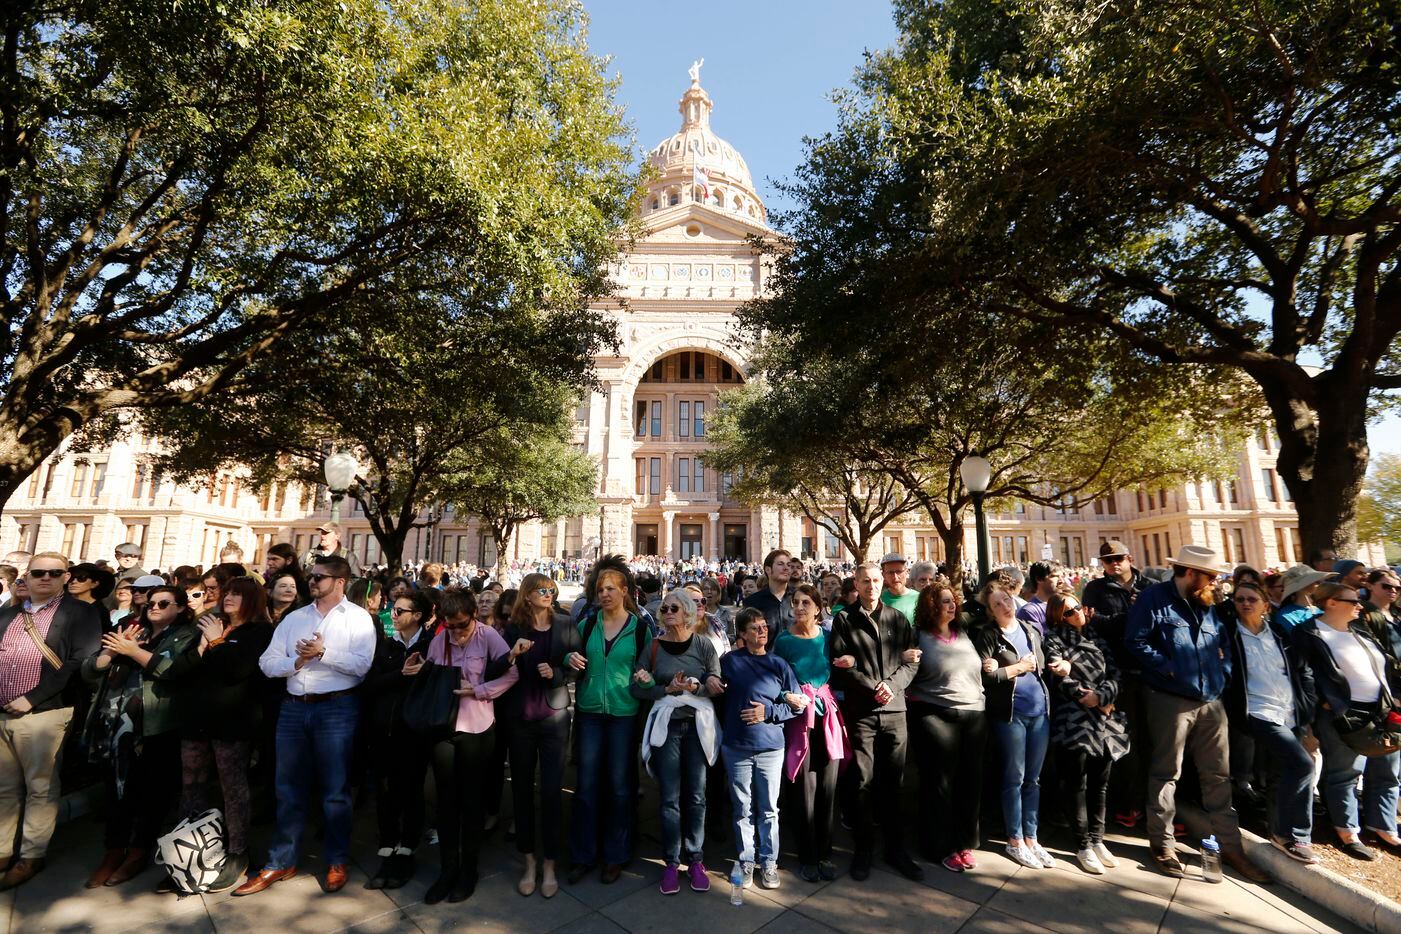 A crowd gathers for a press conference at the steps of the Texas Capitol during the Texas...